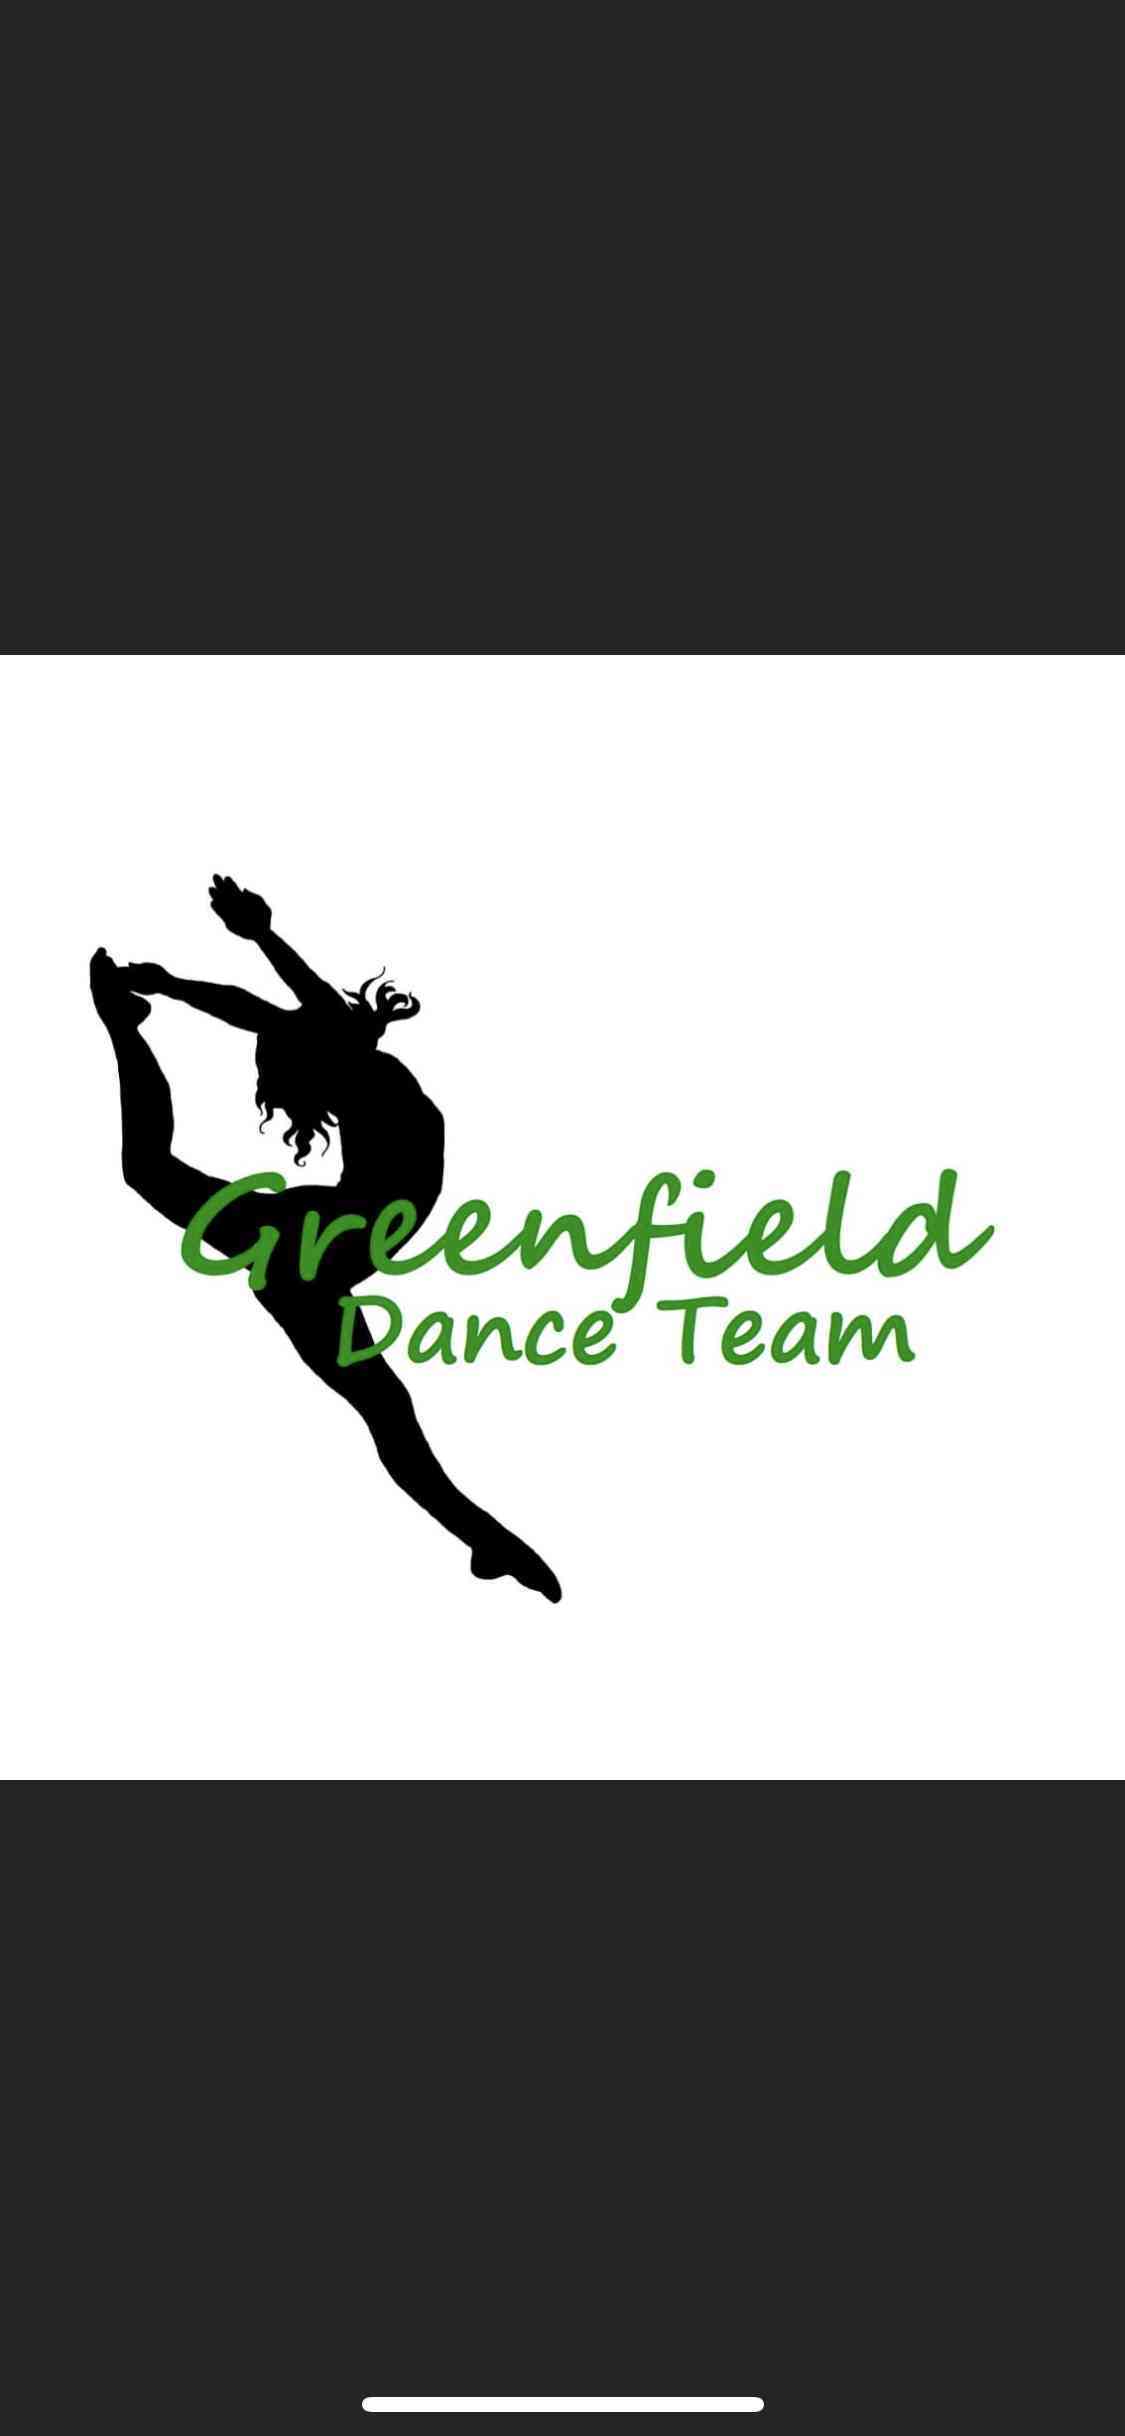 Competition Funds for the Greenfield Dance Team Image